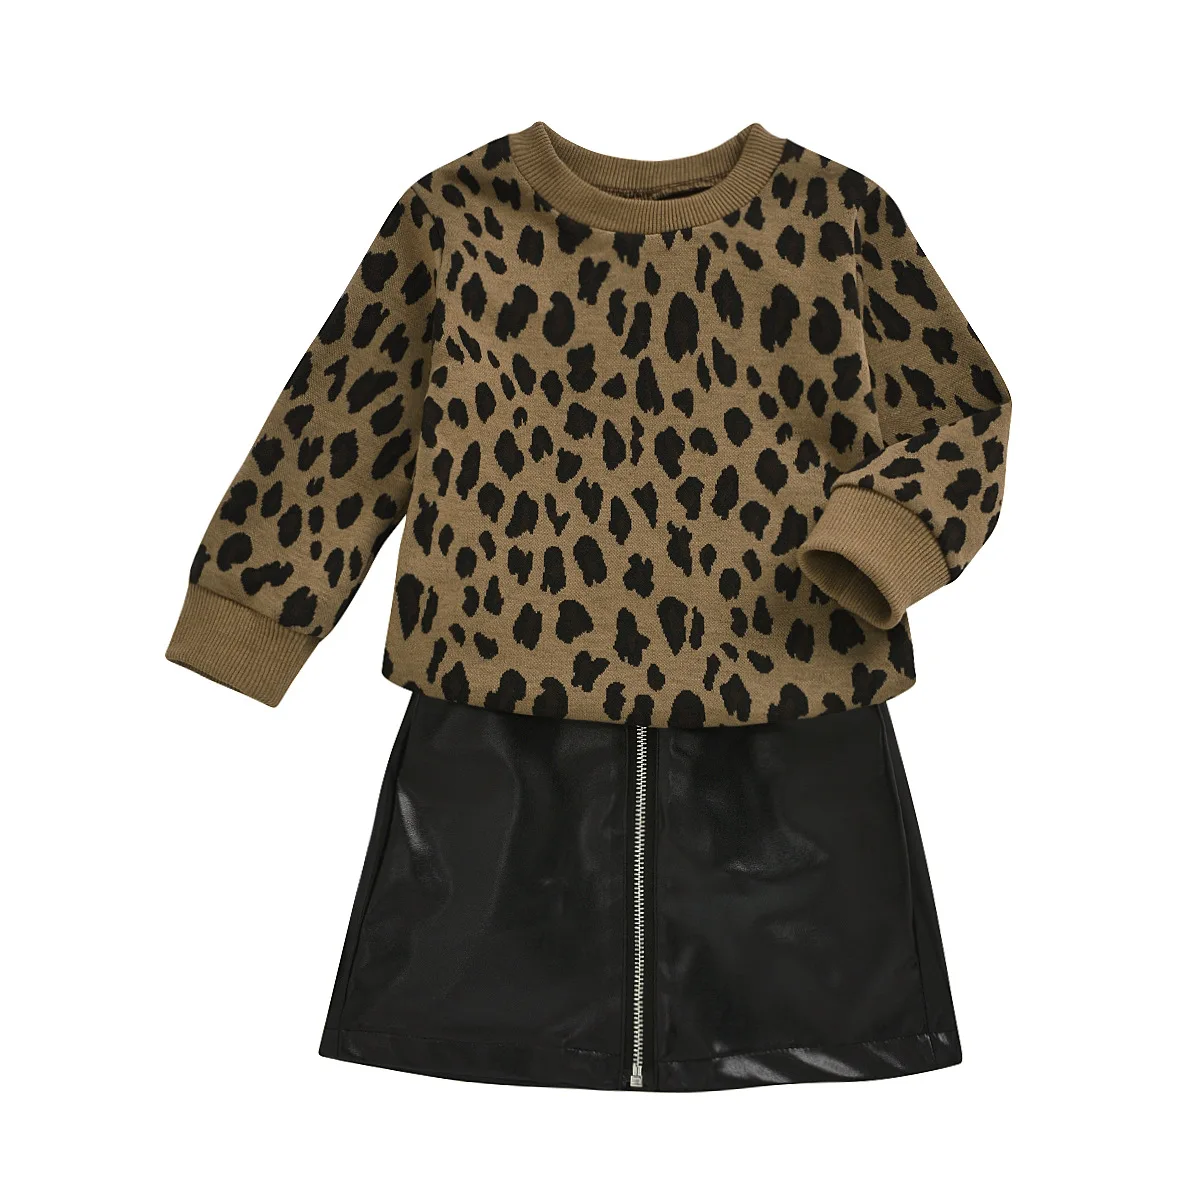 

Autumn 2021 new baby children long sleeve leopard print sweater leather skirt two piece set girls clothing set for hot selling, As pic shows, we can according to your request also